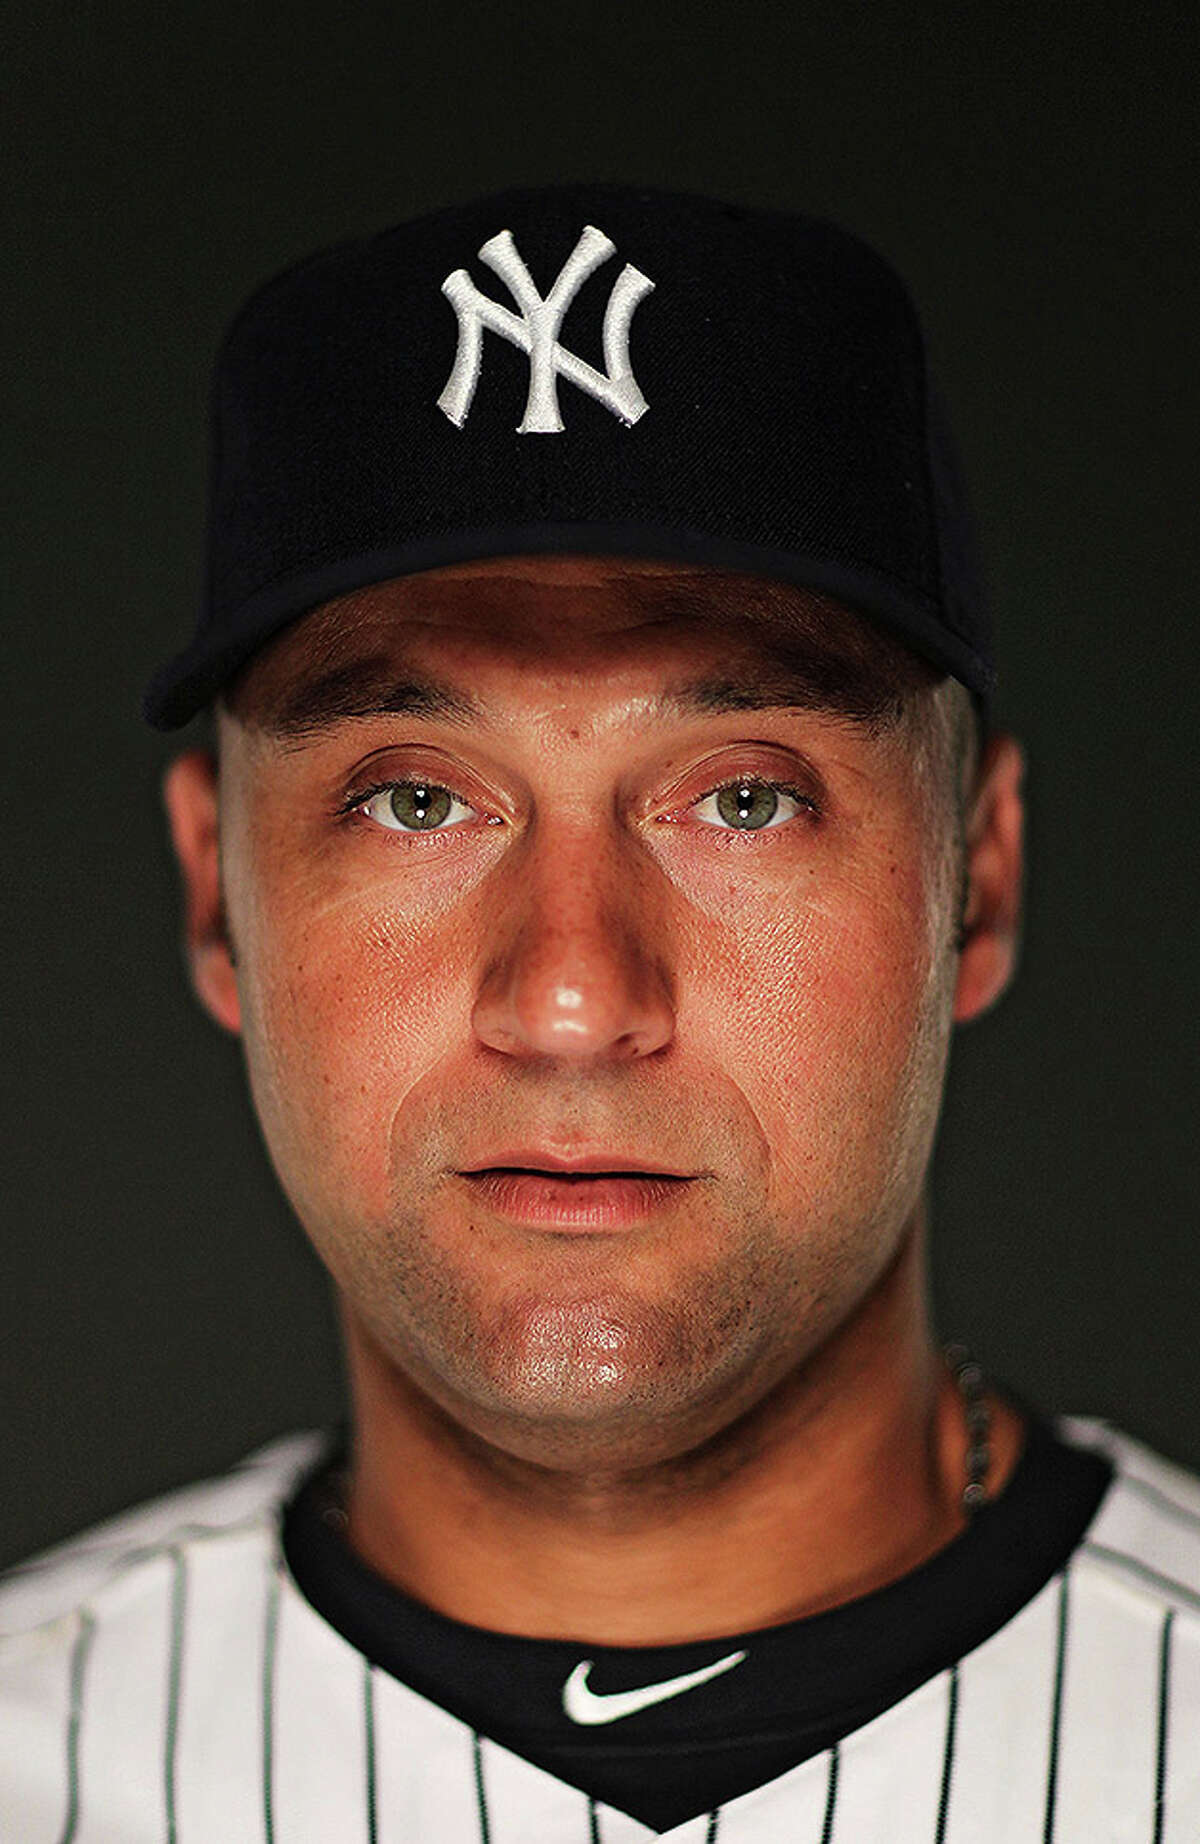 TAMPA, FL - FEBRUARY 23: Derek Jeter #2 of the New York Yankees poses for a portrait on Photo Day at George M. Steinbrenner Field on February 23, 2011 in Tampa, Florida. (Photo by Al Bello/Getty Images) *** Local Caption *** Derek Jeter